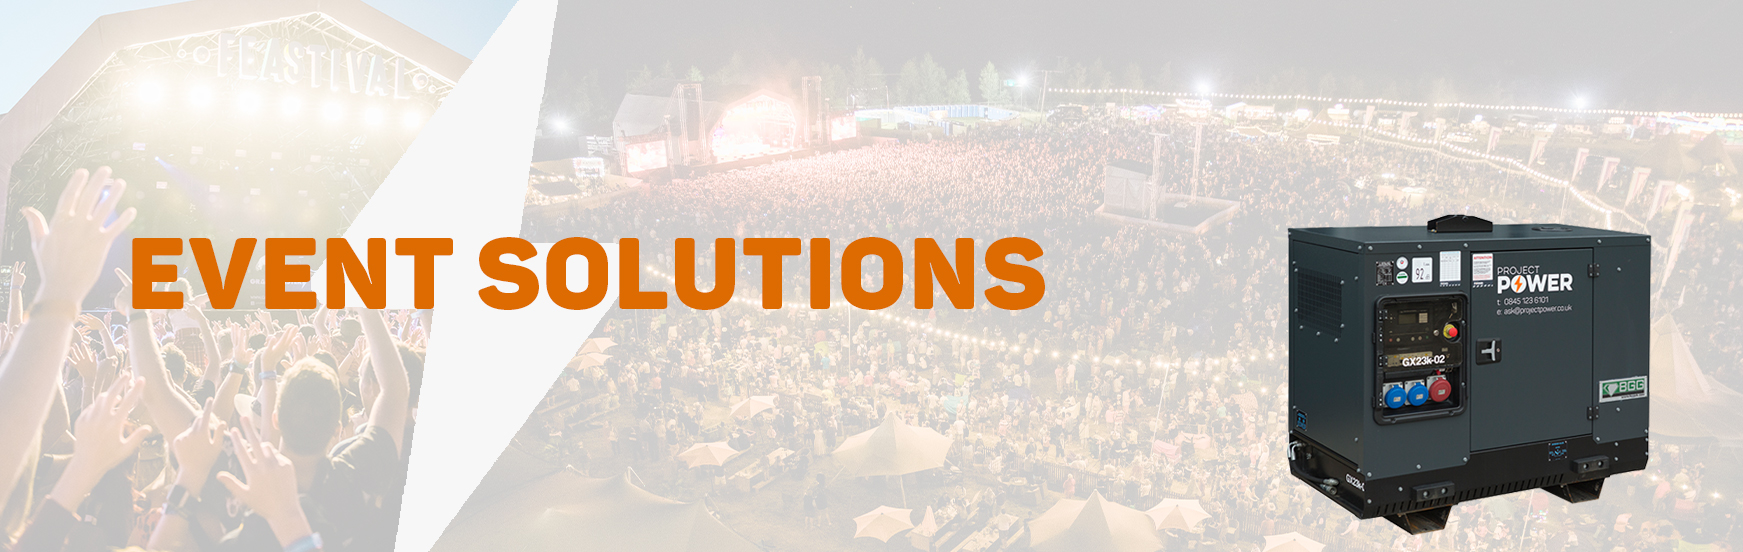 project power event solutions